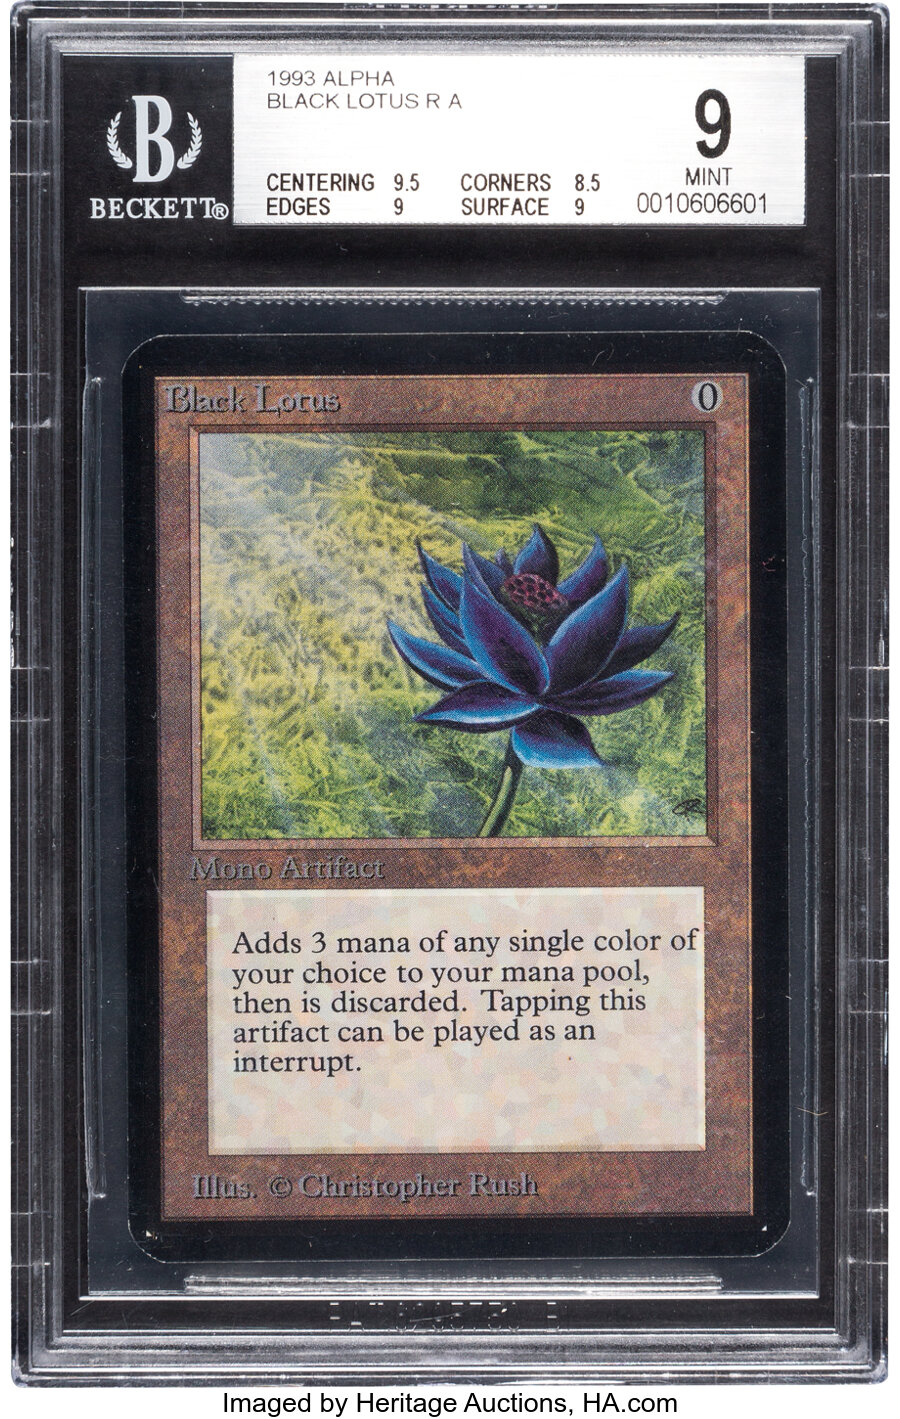 Magic: The Gathering Alpha Edition Black Lotus (Wizards of the Coast, 1993) BGS MINT 9